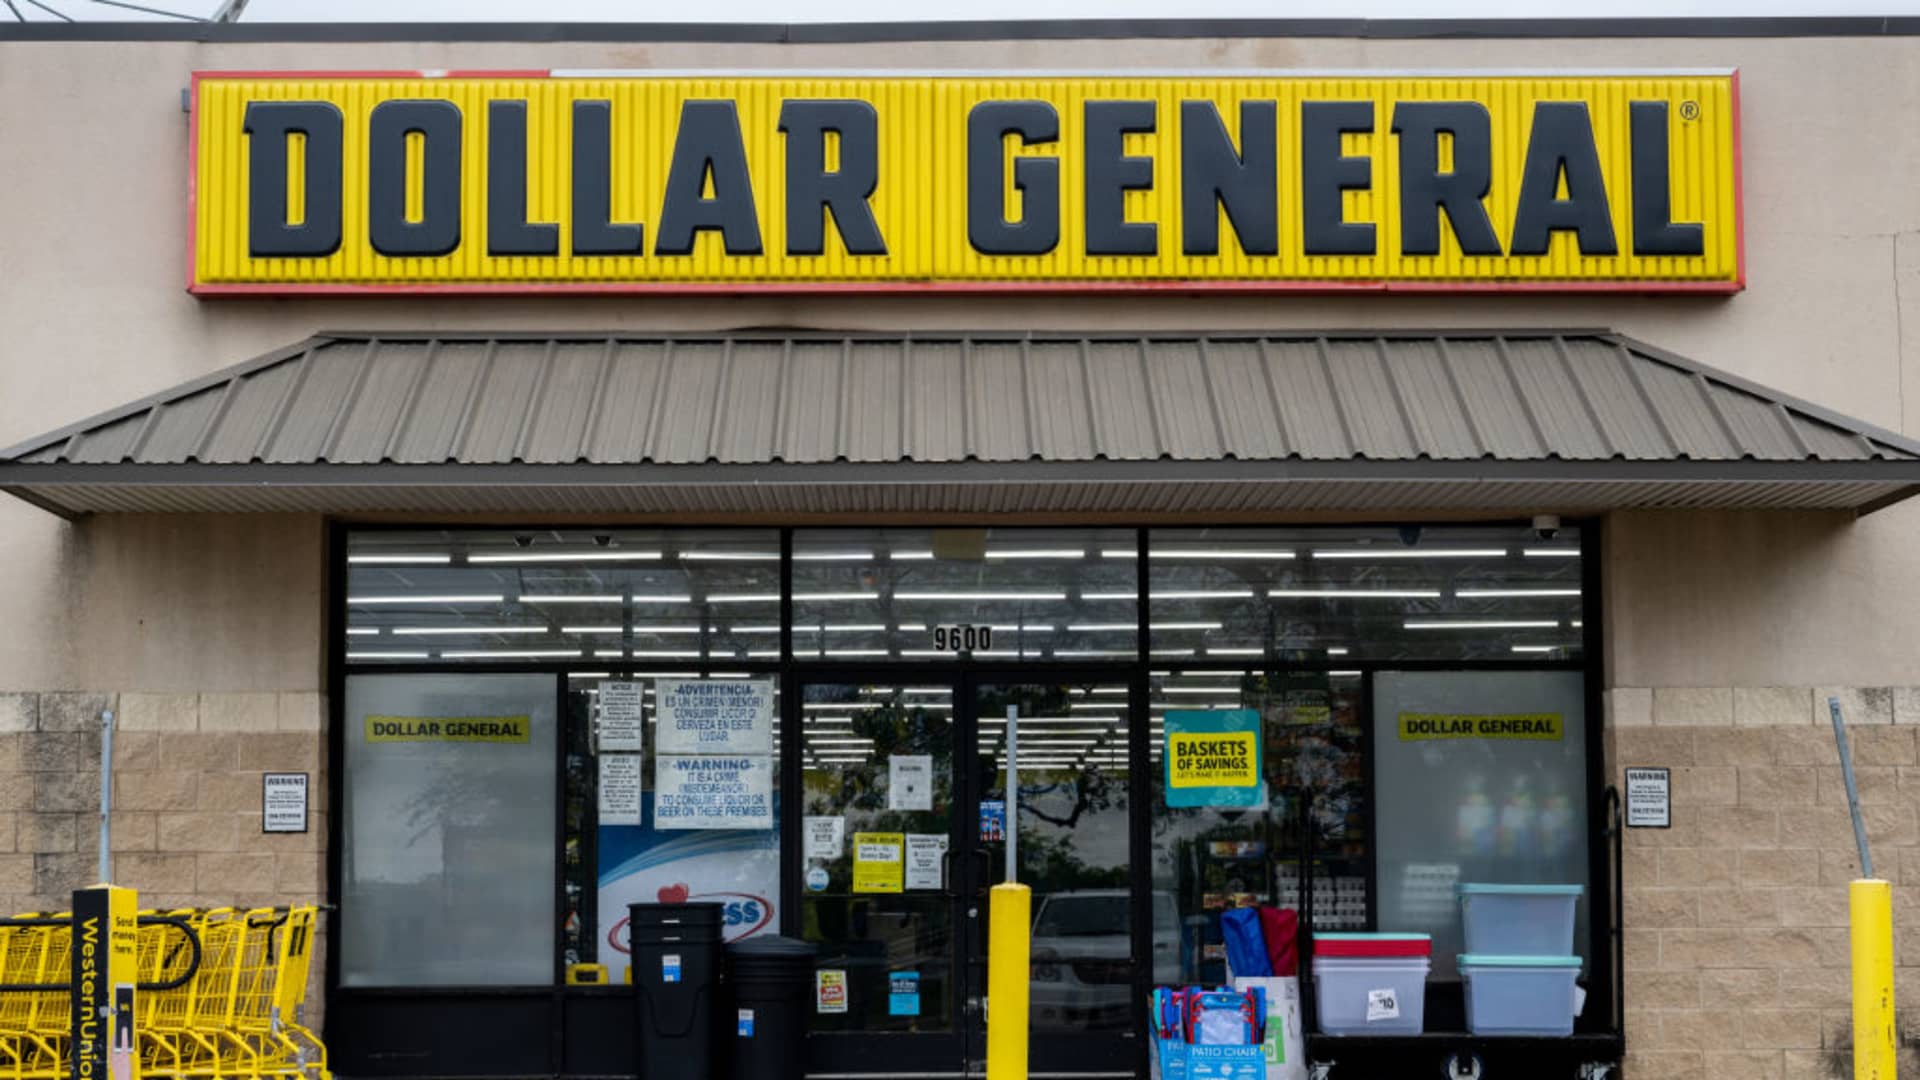 Dollar General worker safety proposal passes at shareholder meeting